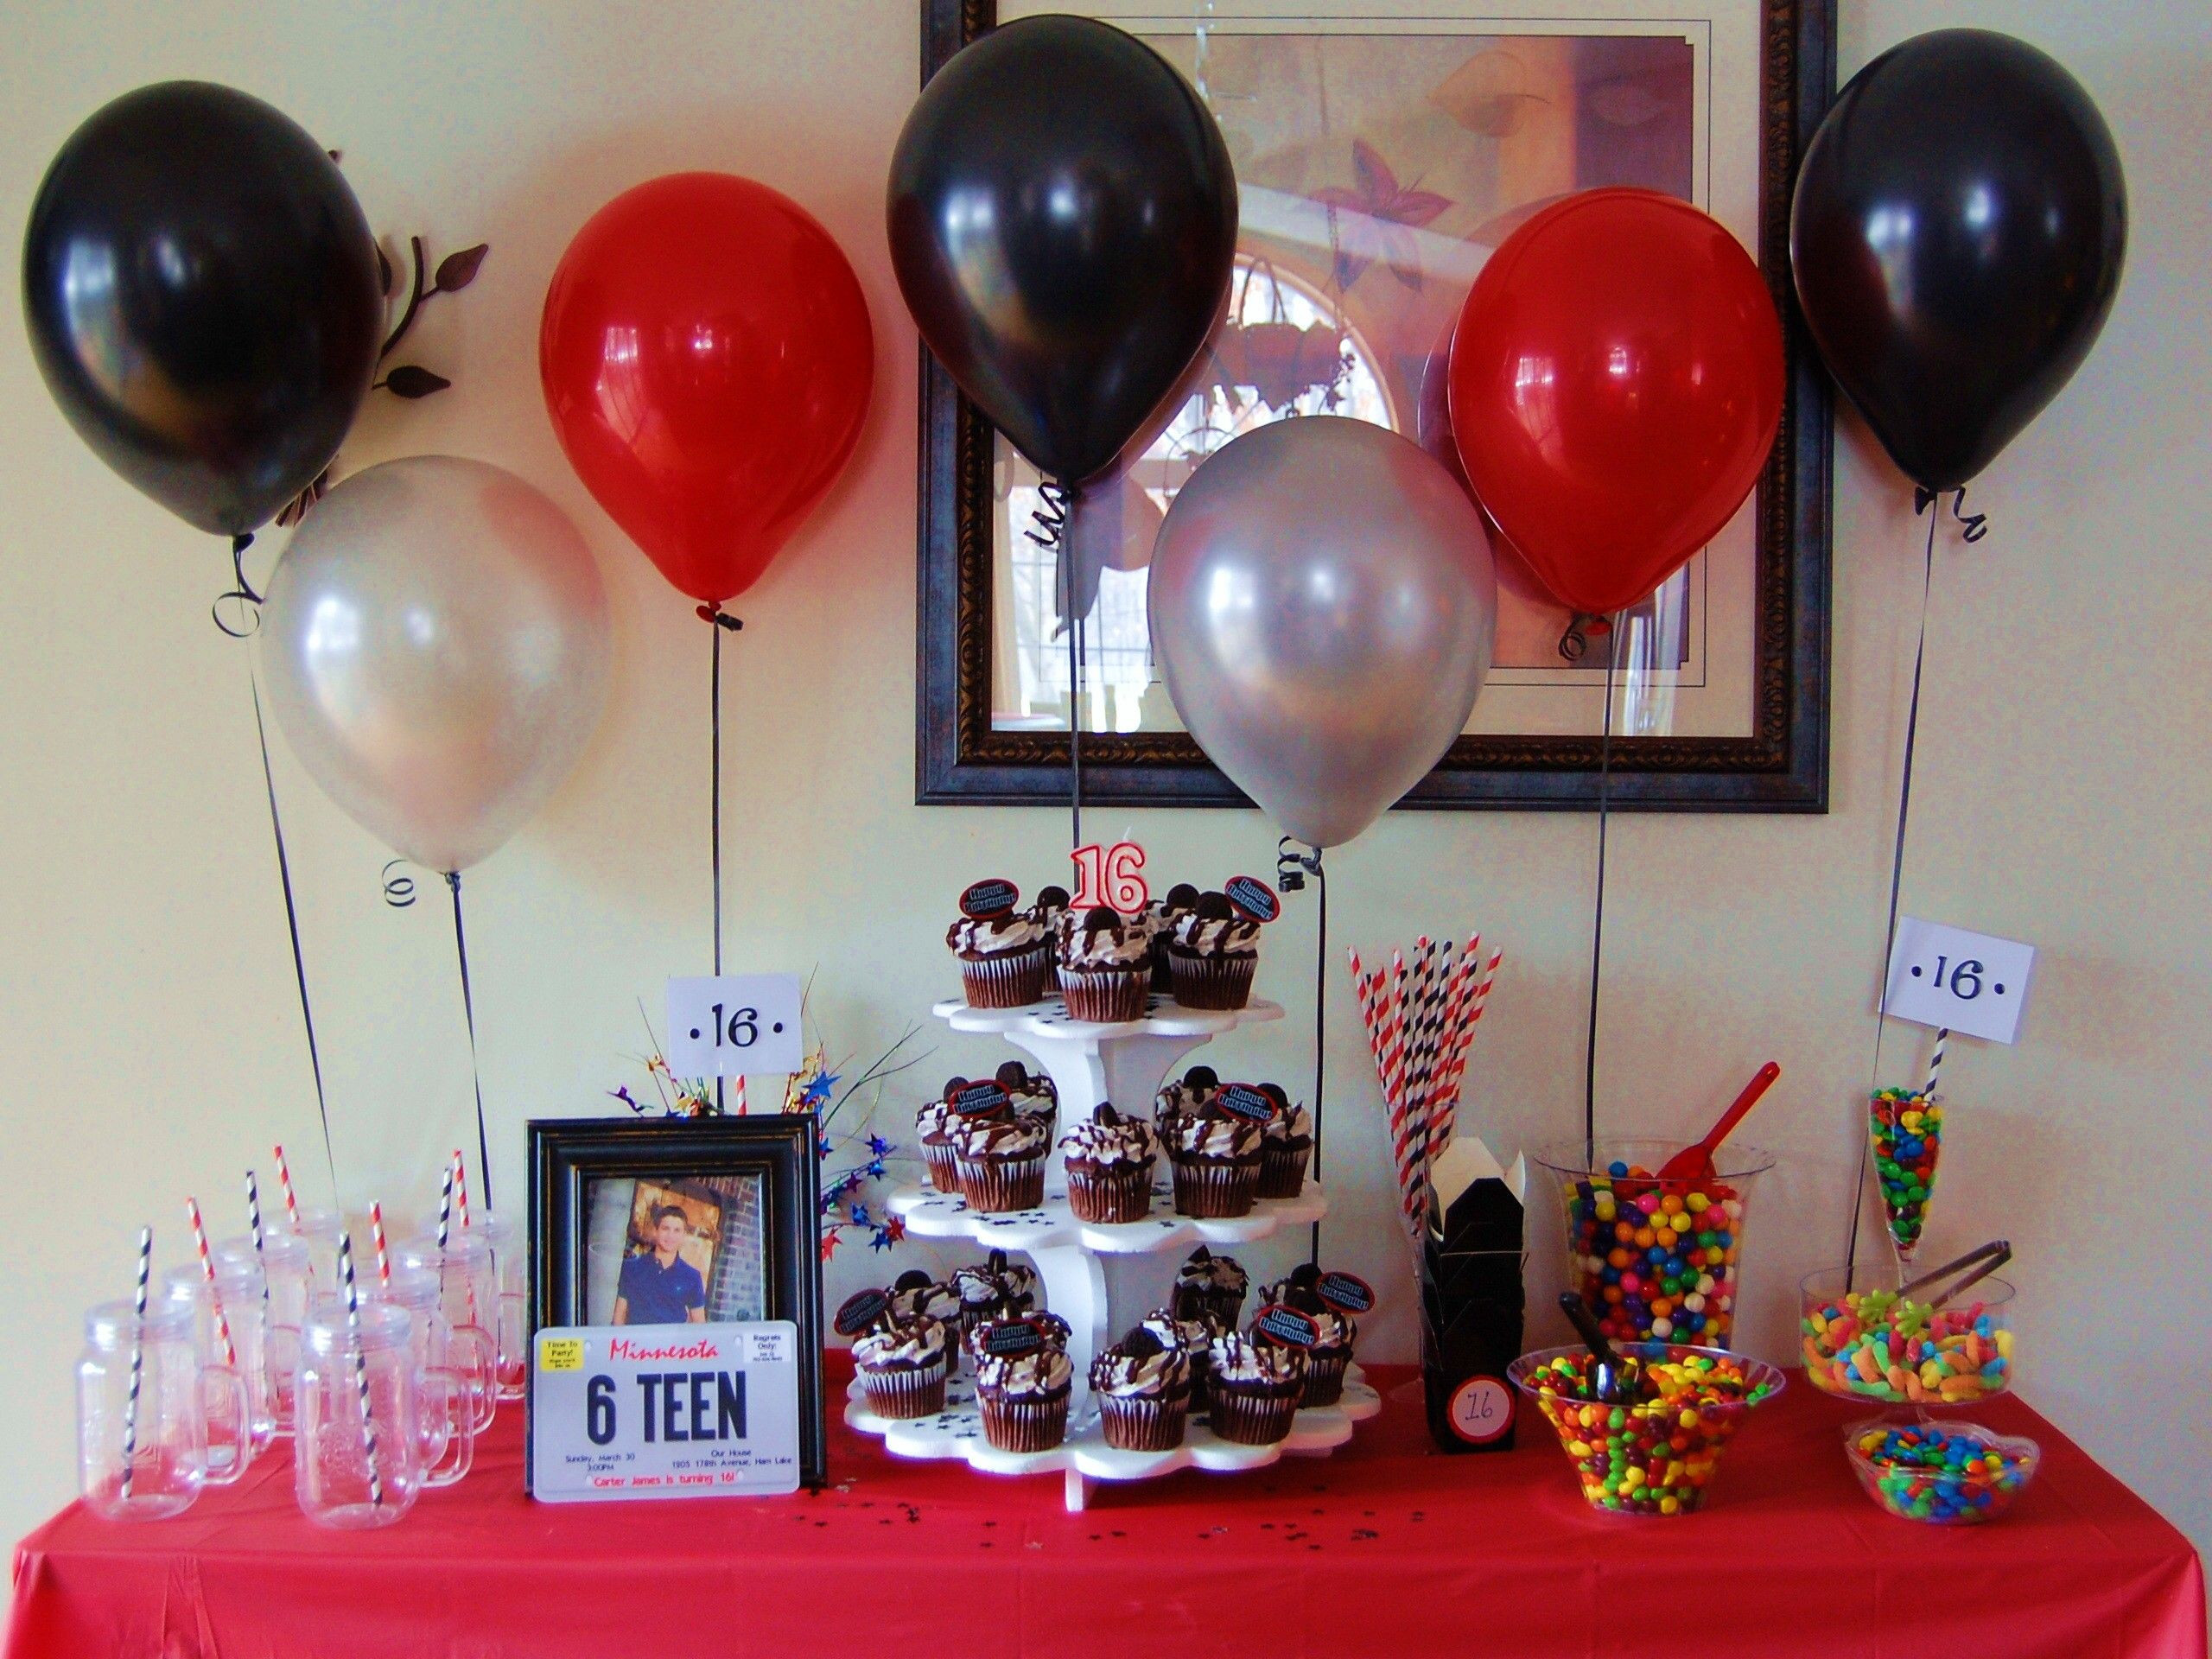 Sweet 16 Birthday Party Ideas For Girl
 SIXTEENTH BIRTHDAY for a GUY Sweet sixteen party ideas